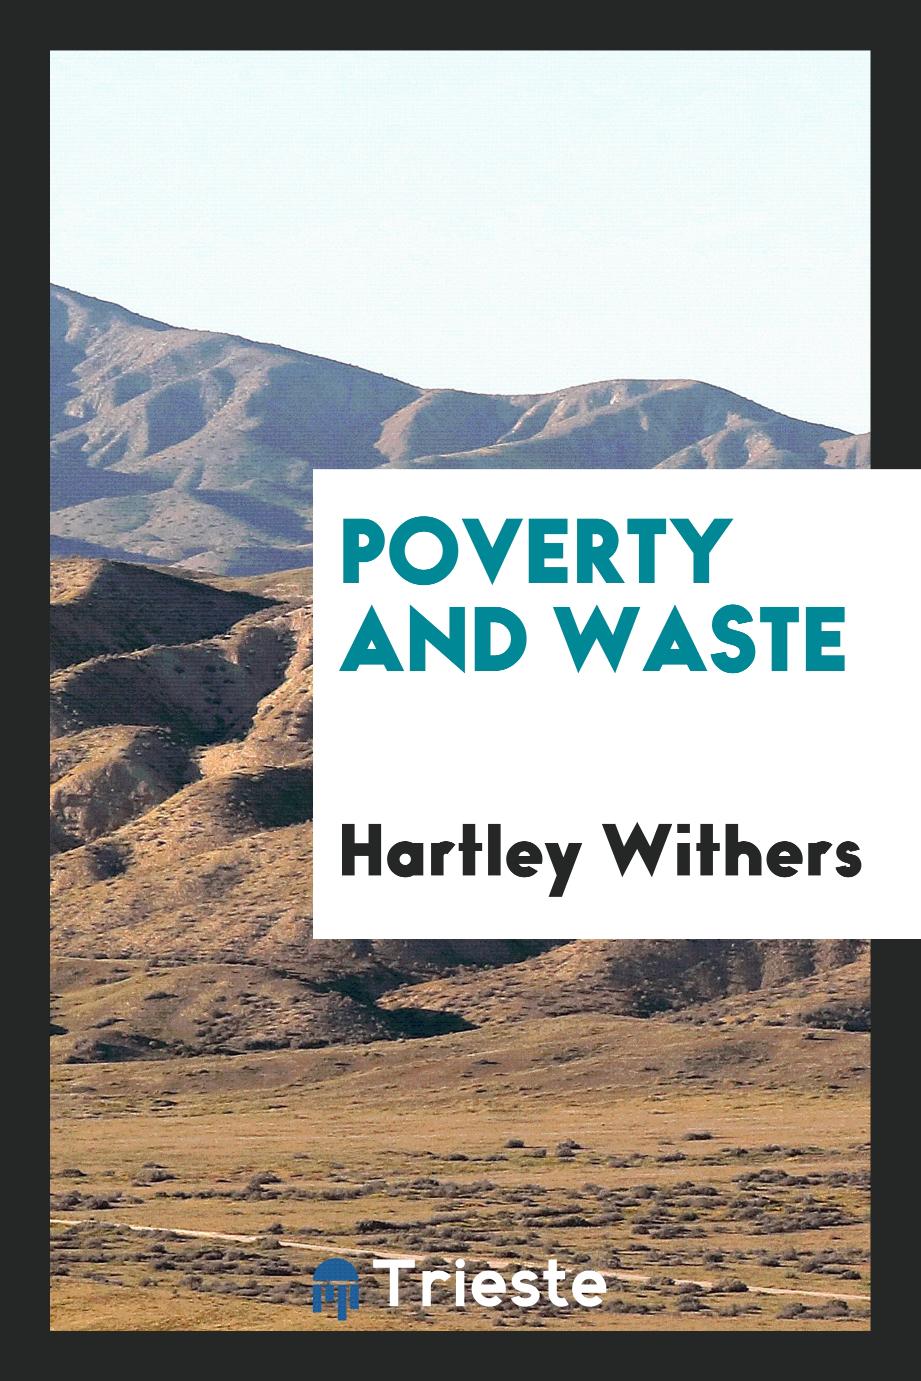 Poverty and waste